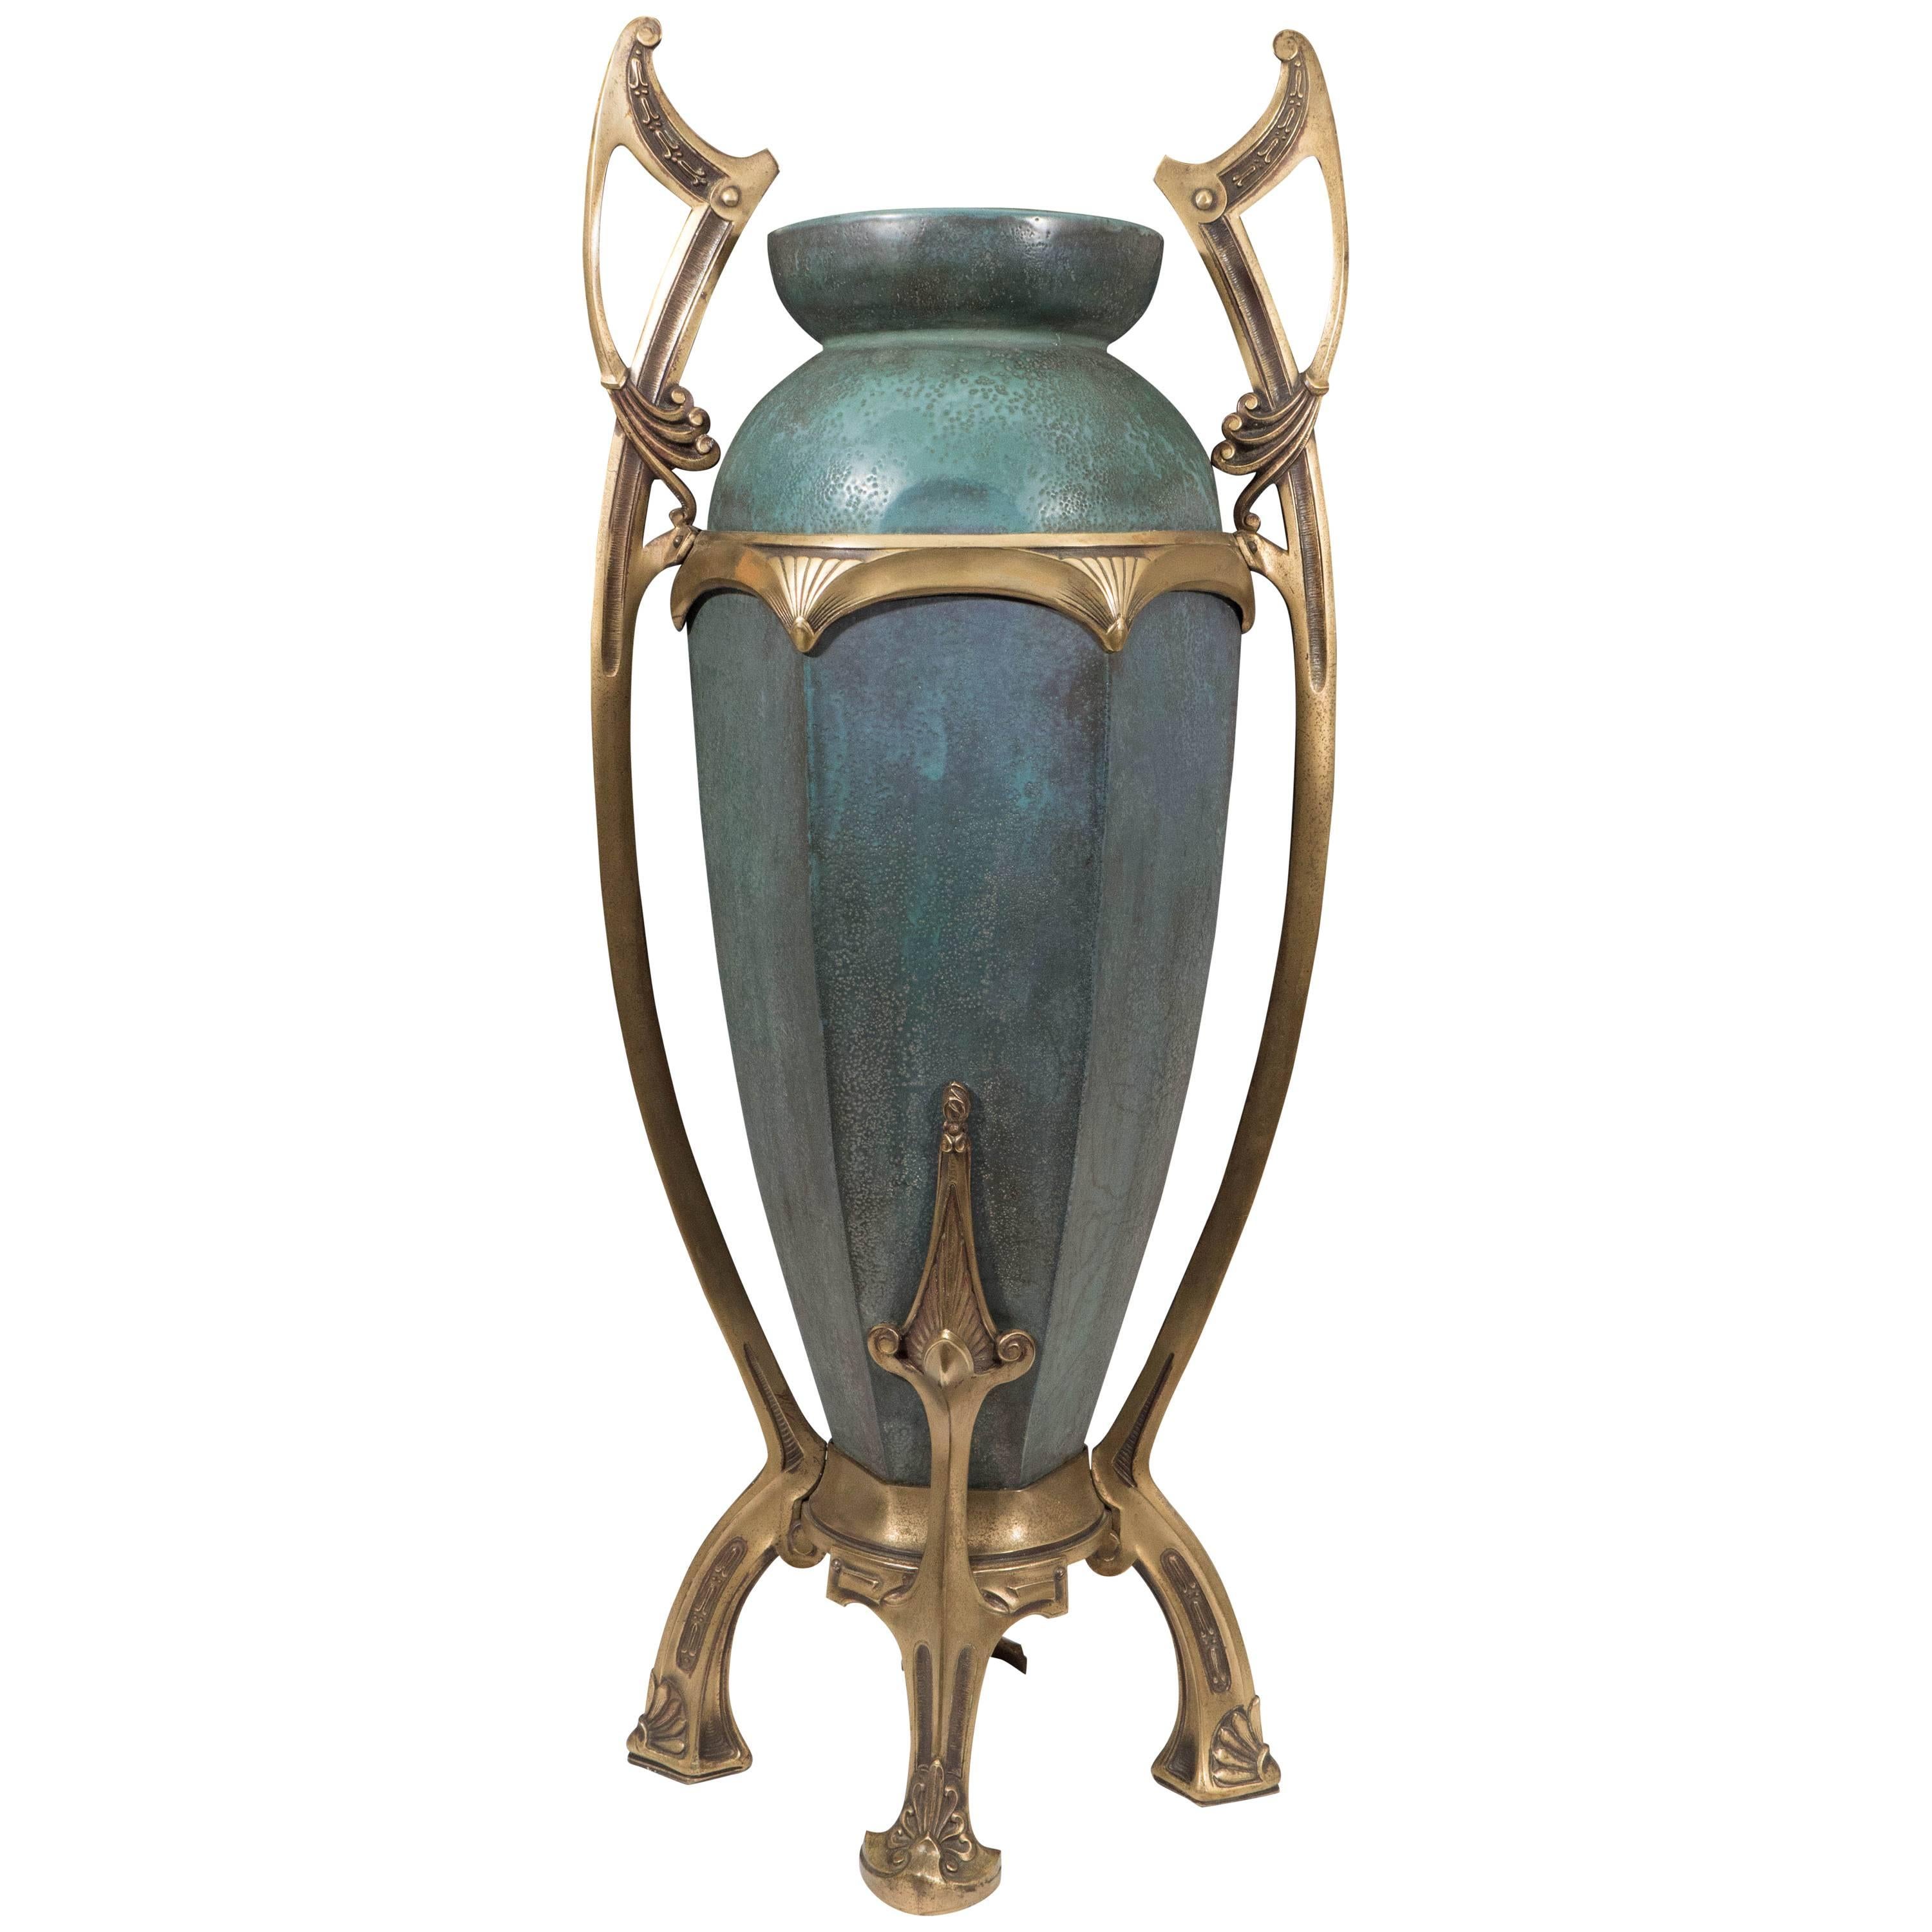 Amphora Early 20th Century Bronze-Mounted Ceramic Vase by Paul Dachsel